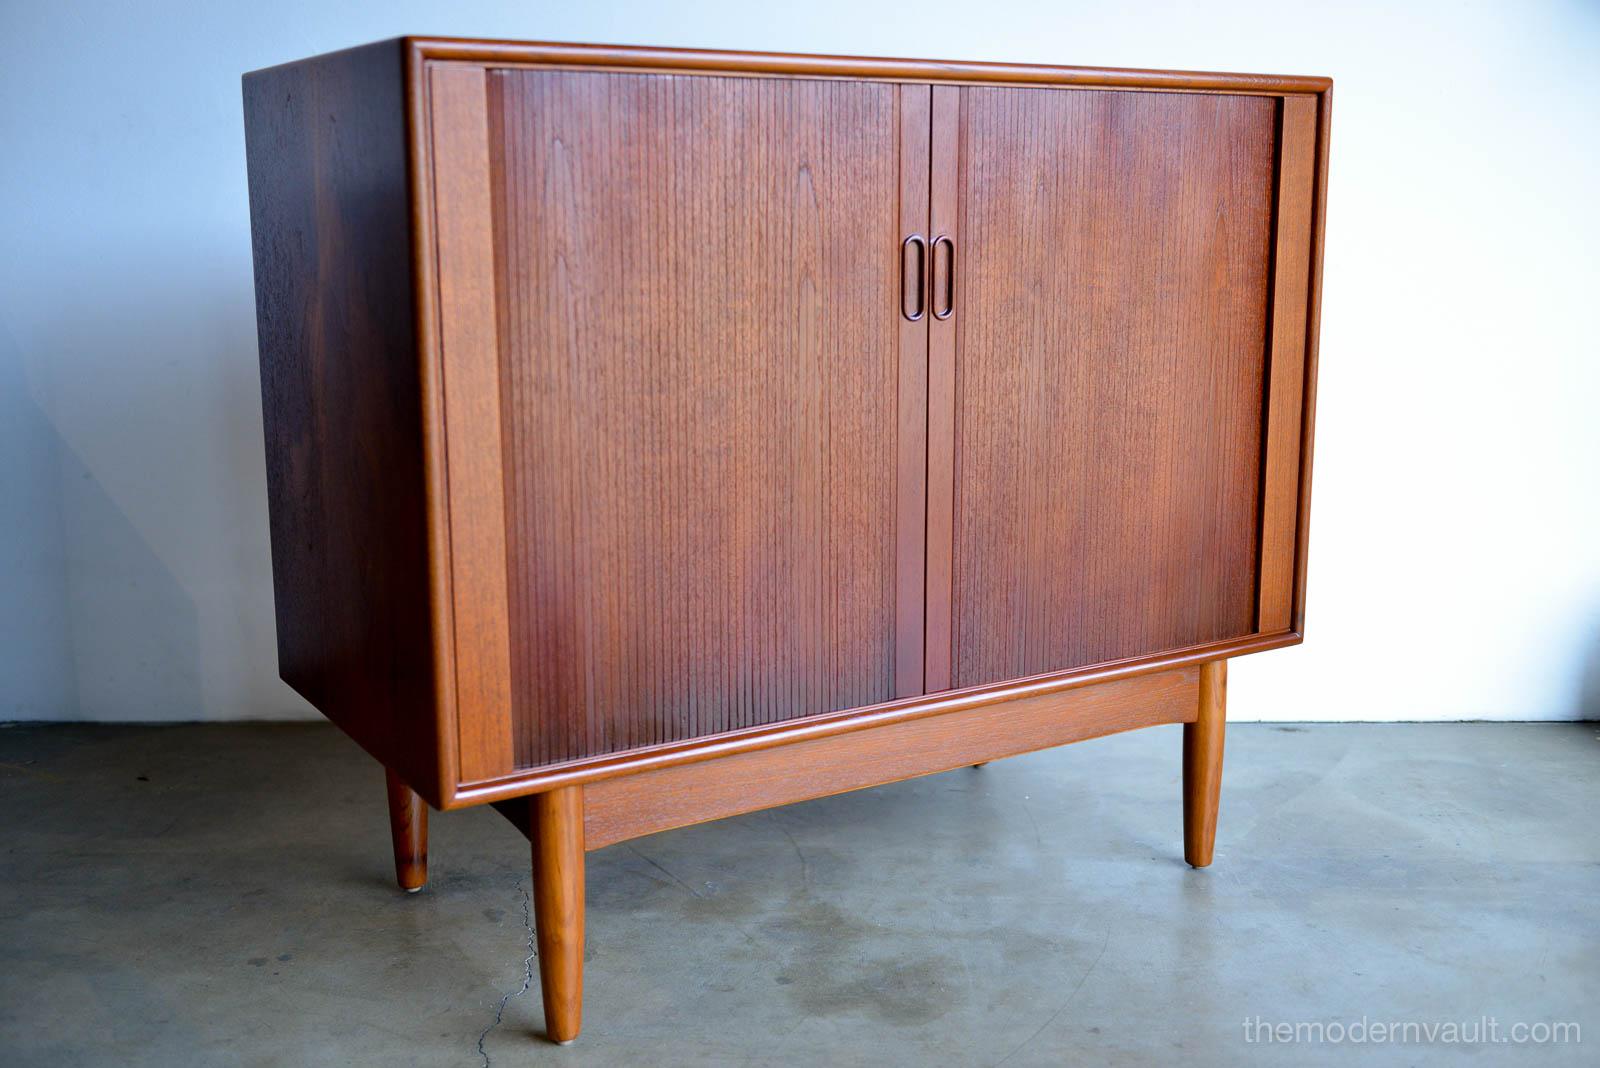 Teak and Oak Tambour Door Cabinet by Hans C. Andersen, circa 1965. Imported to the U.S. by Gunnar Schwartz of Los Angeles. Teak tambour doors with oak base. Professionally restored in perfect condition. Adjustable shelves on the inside and a small